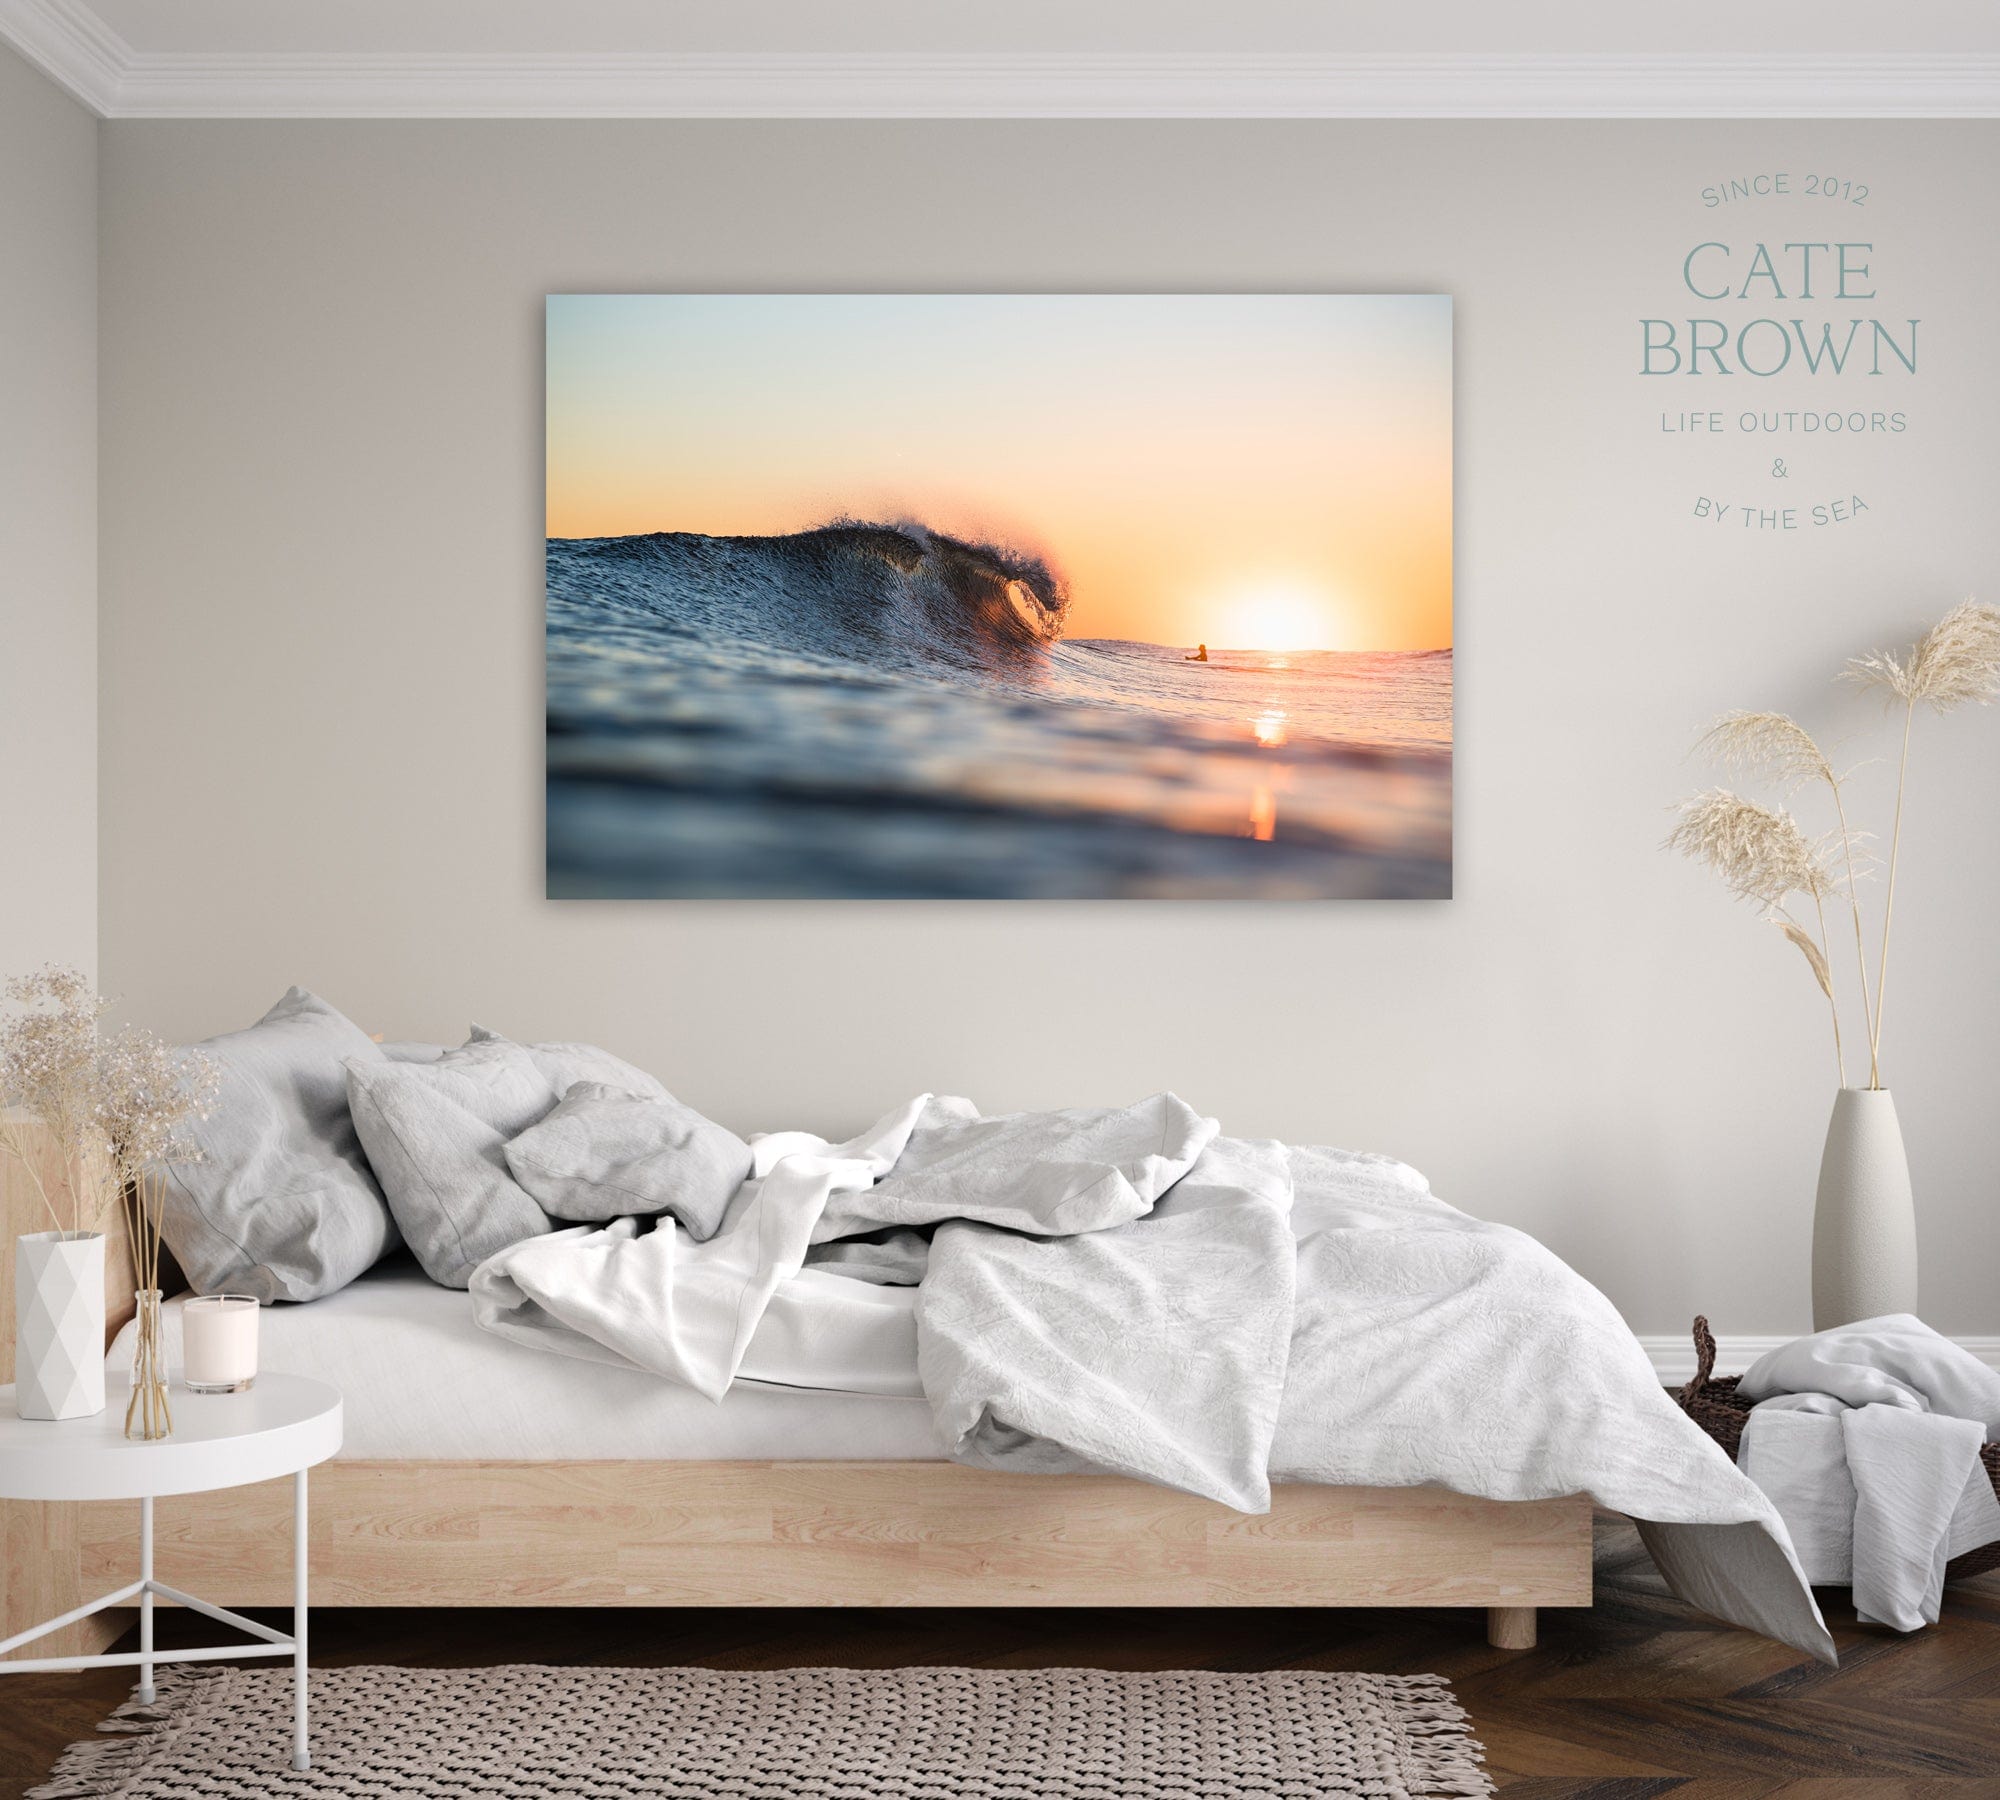 Cate Brown Photo Canvas / 16"x24" / None (Print Only) Fading Summer  //  Ocean Photography Made to Order Ocean Fine Art